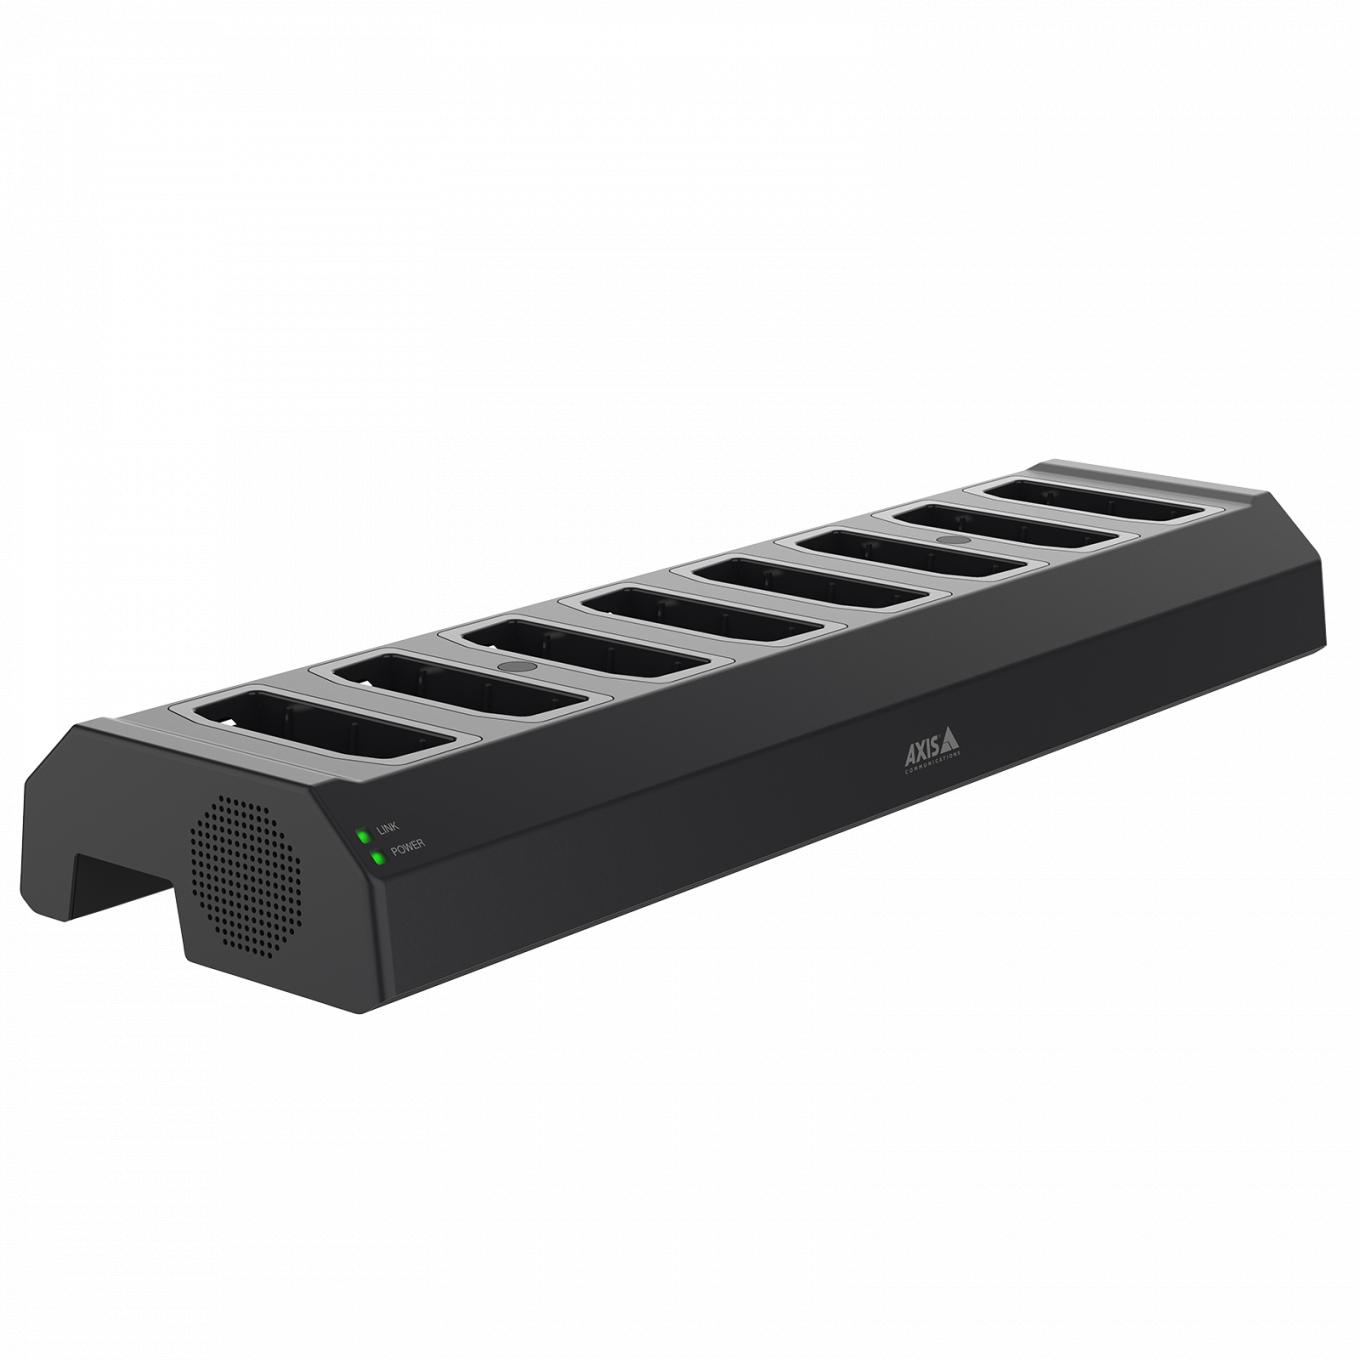 AXIS W701 Docking station from right